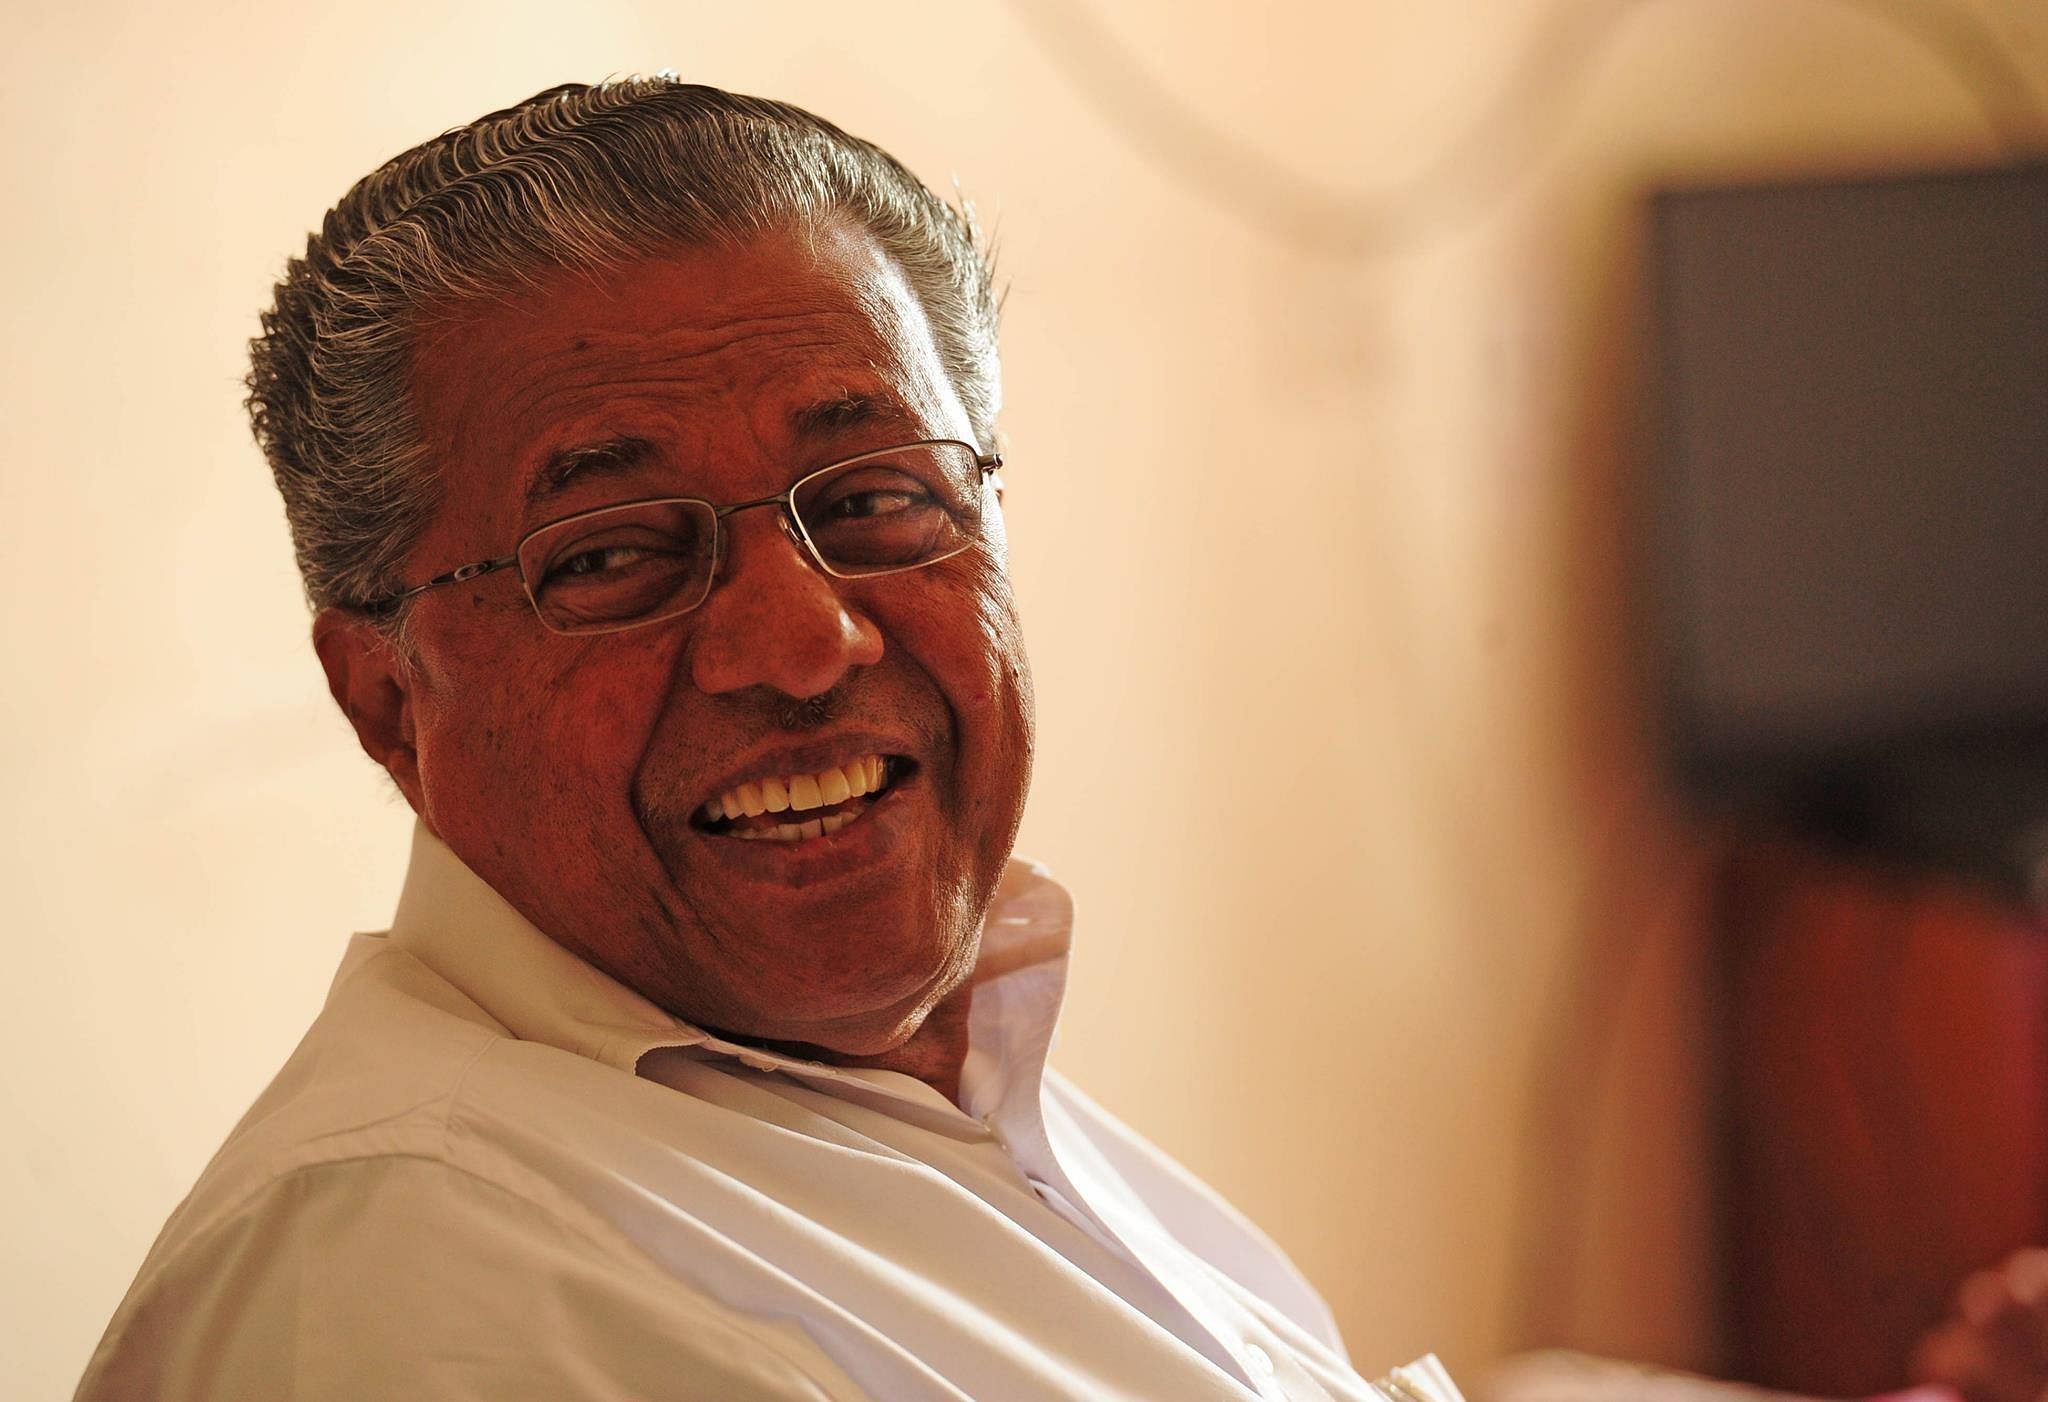 The progress card claimed that the Pinarayi Vijayan-led government had fulfilled several of its over 600 poll promises mentioned in the election manifesto.